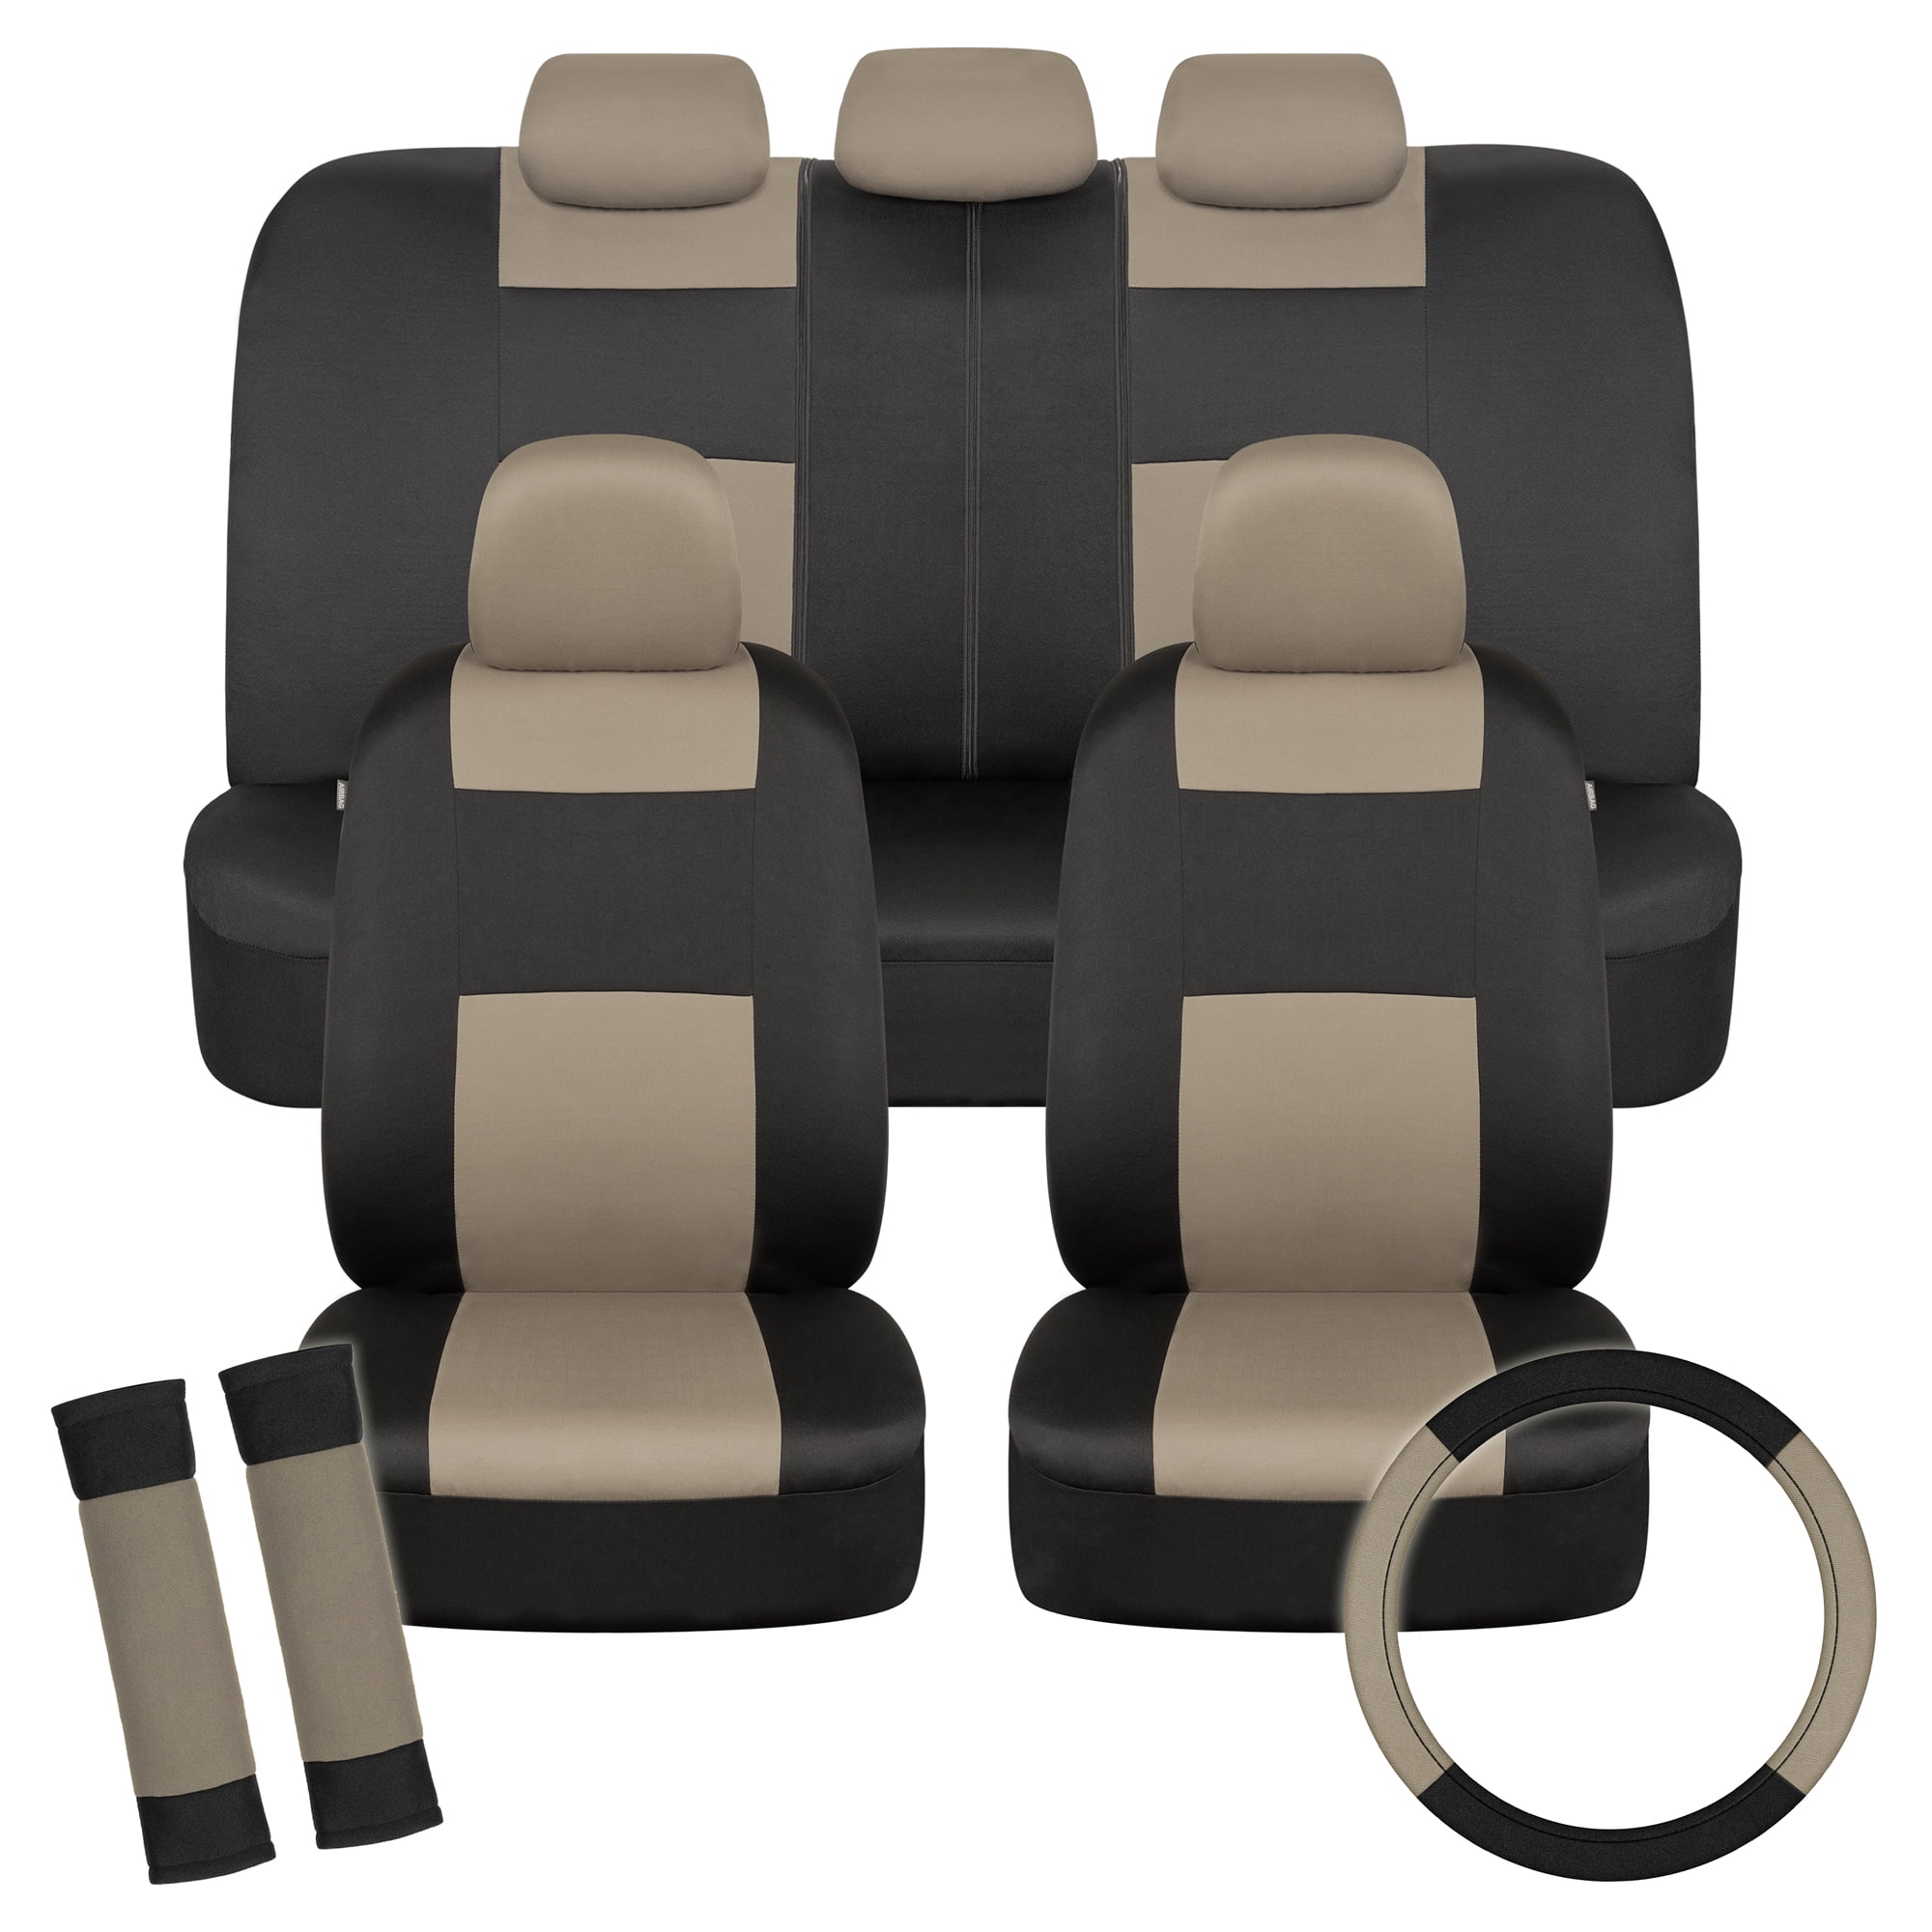 Advanced Performance Car Seat Covers - Instant Install Sideless Fronts +  Full Interior Set for Auto